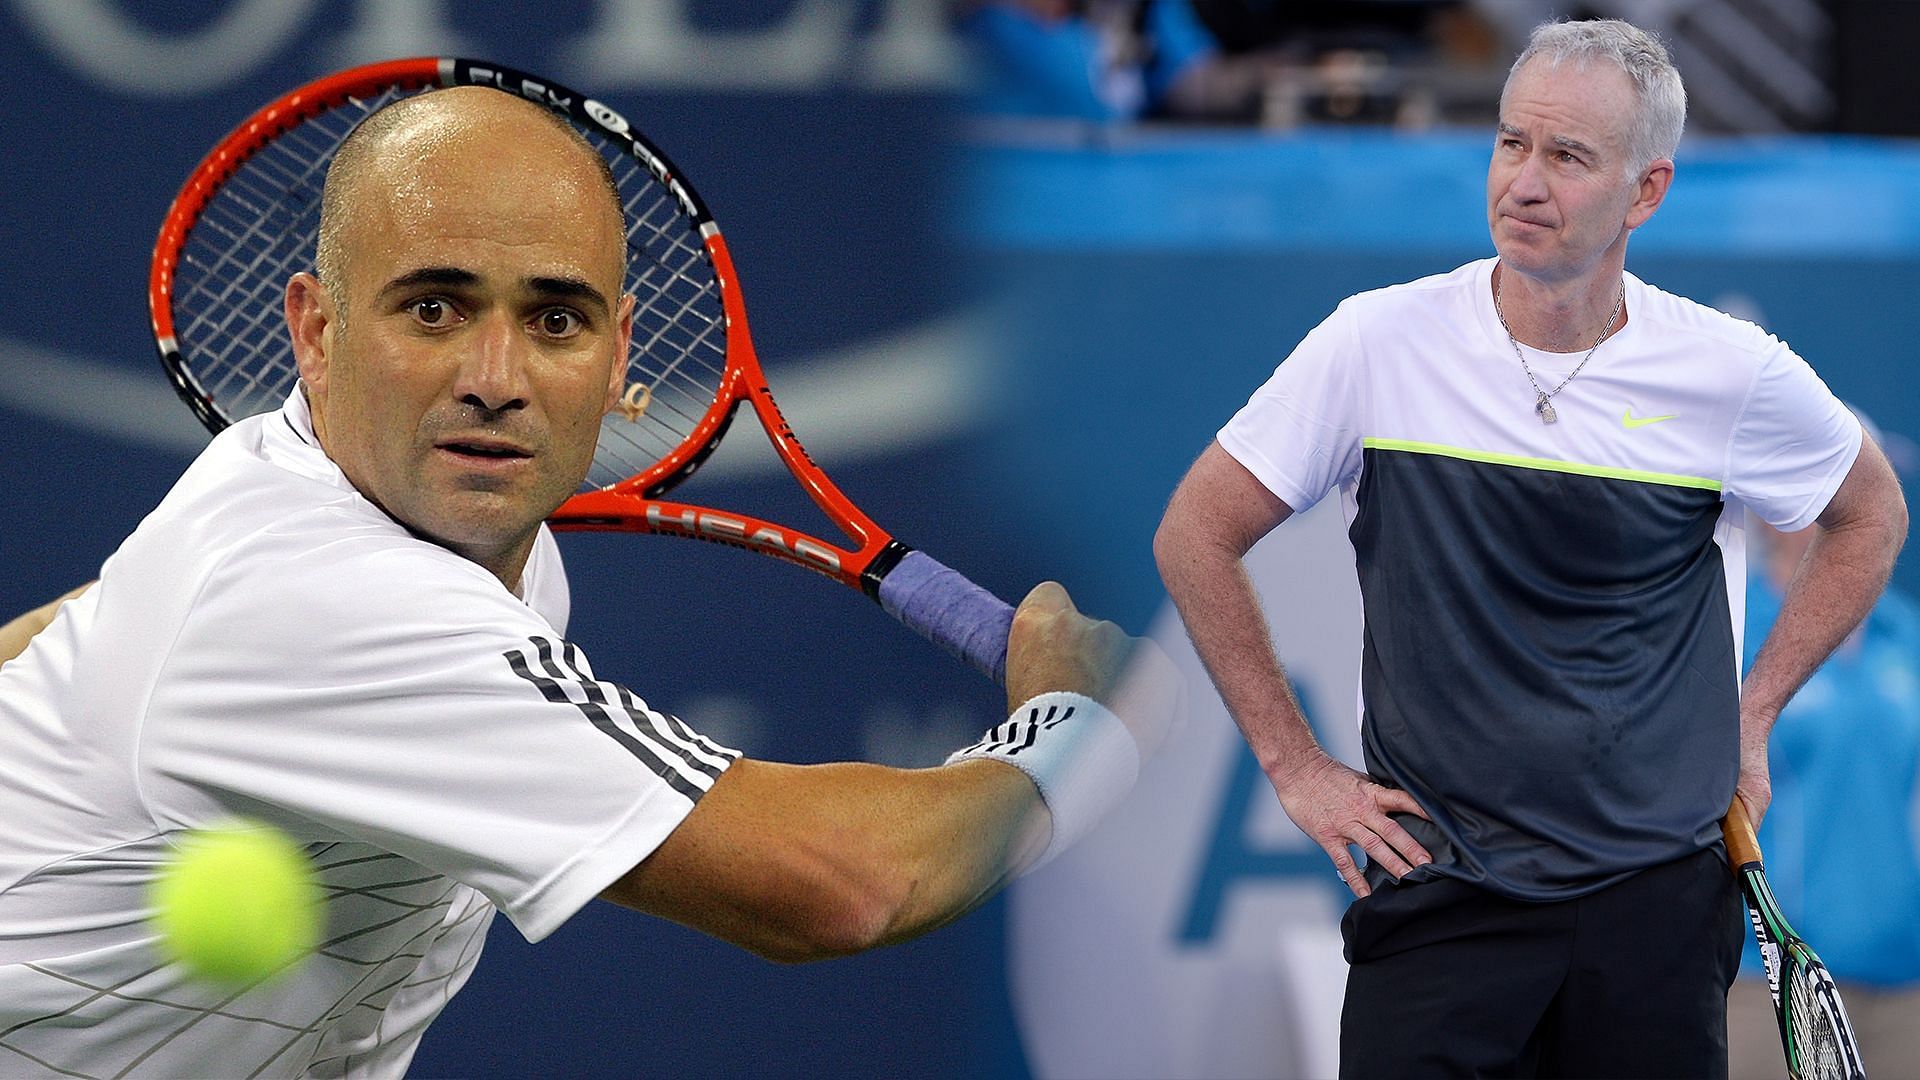 5 tennis players who were disqualified the most during matches in the Open Era ft. Andre Agassi and John McEnroe